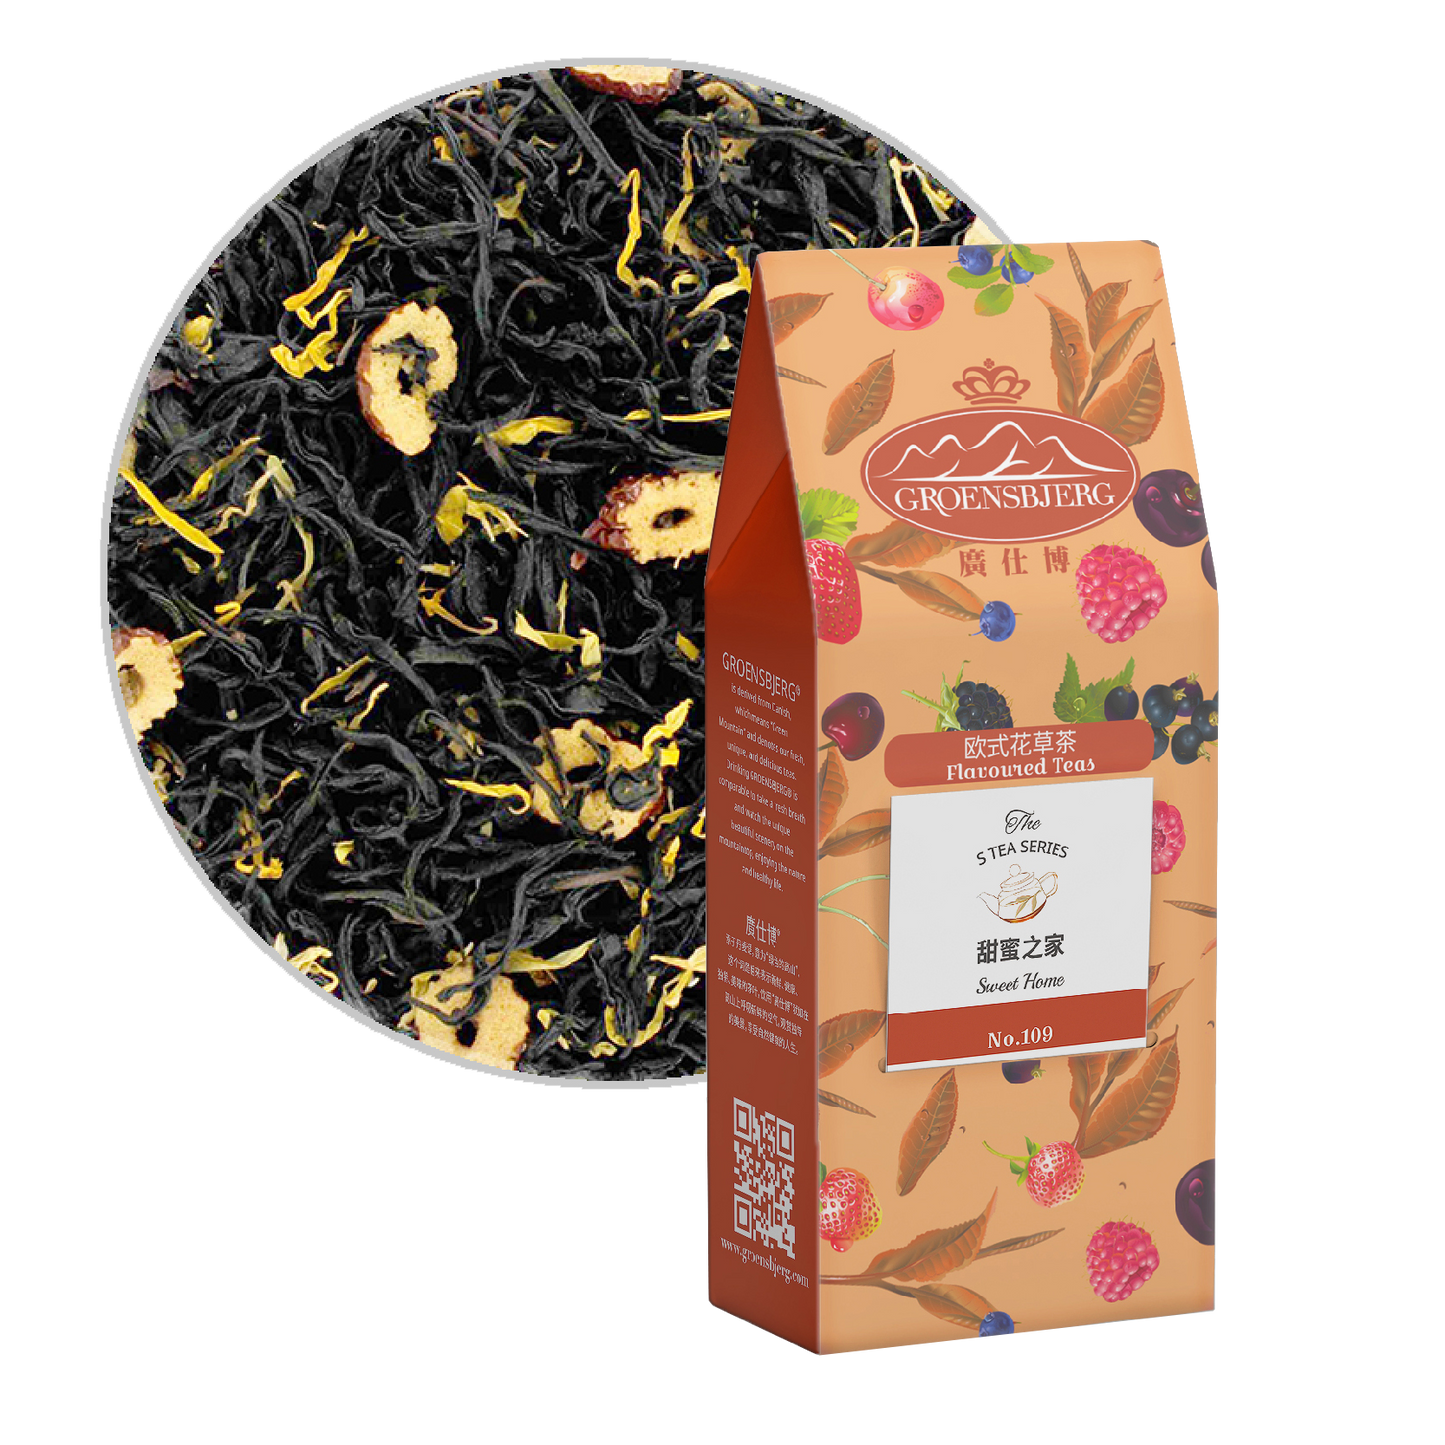 Sweet Home 60g Pouch Box with Loose Tea